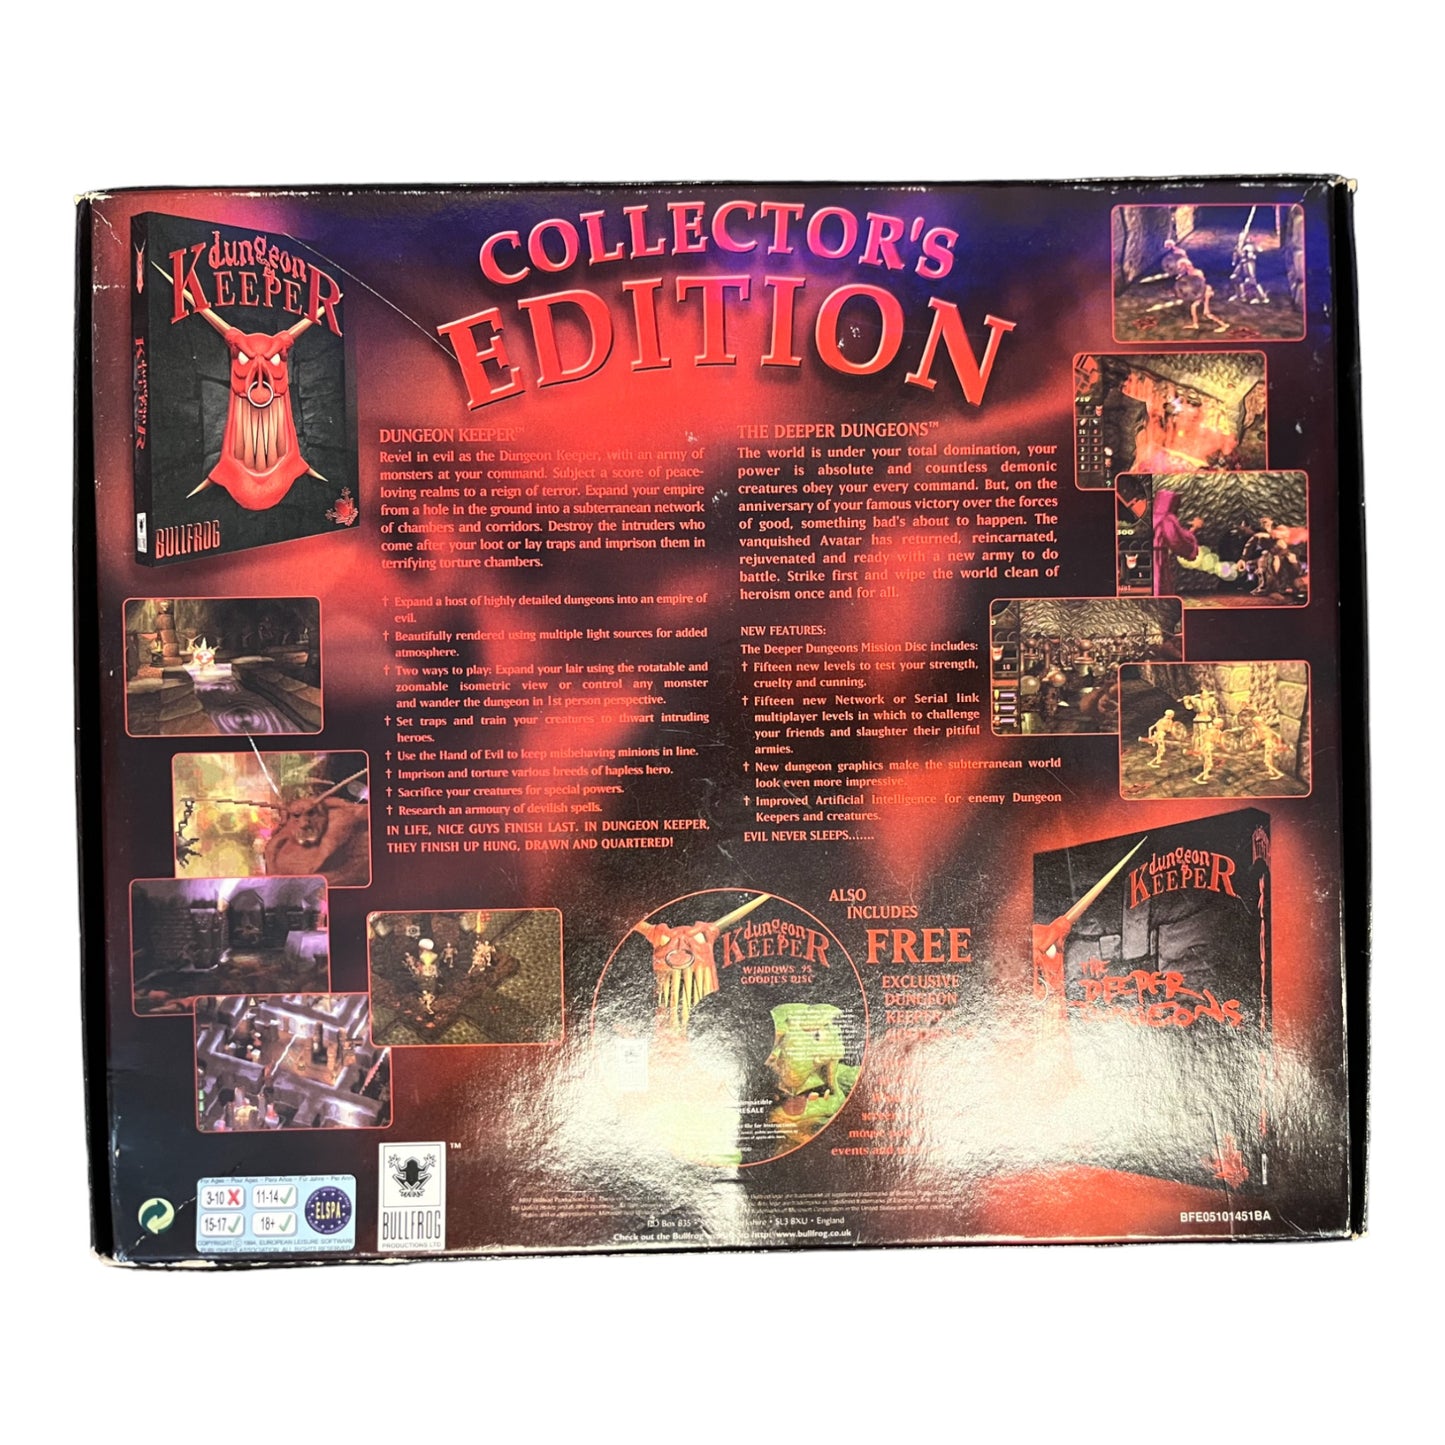 Dungeon Keeper Collector's Edition